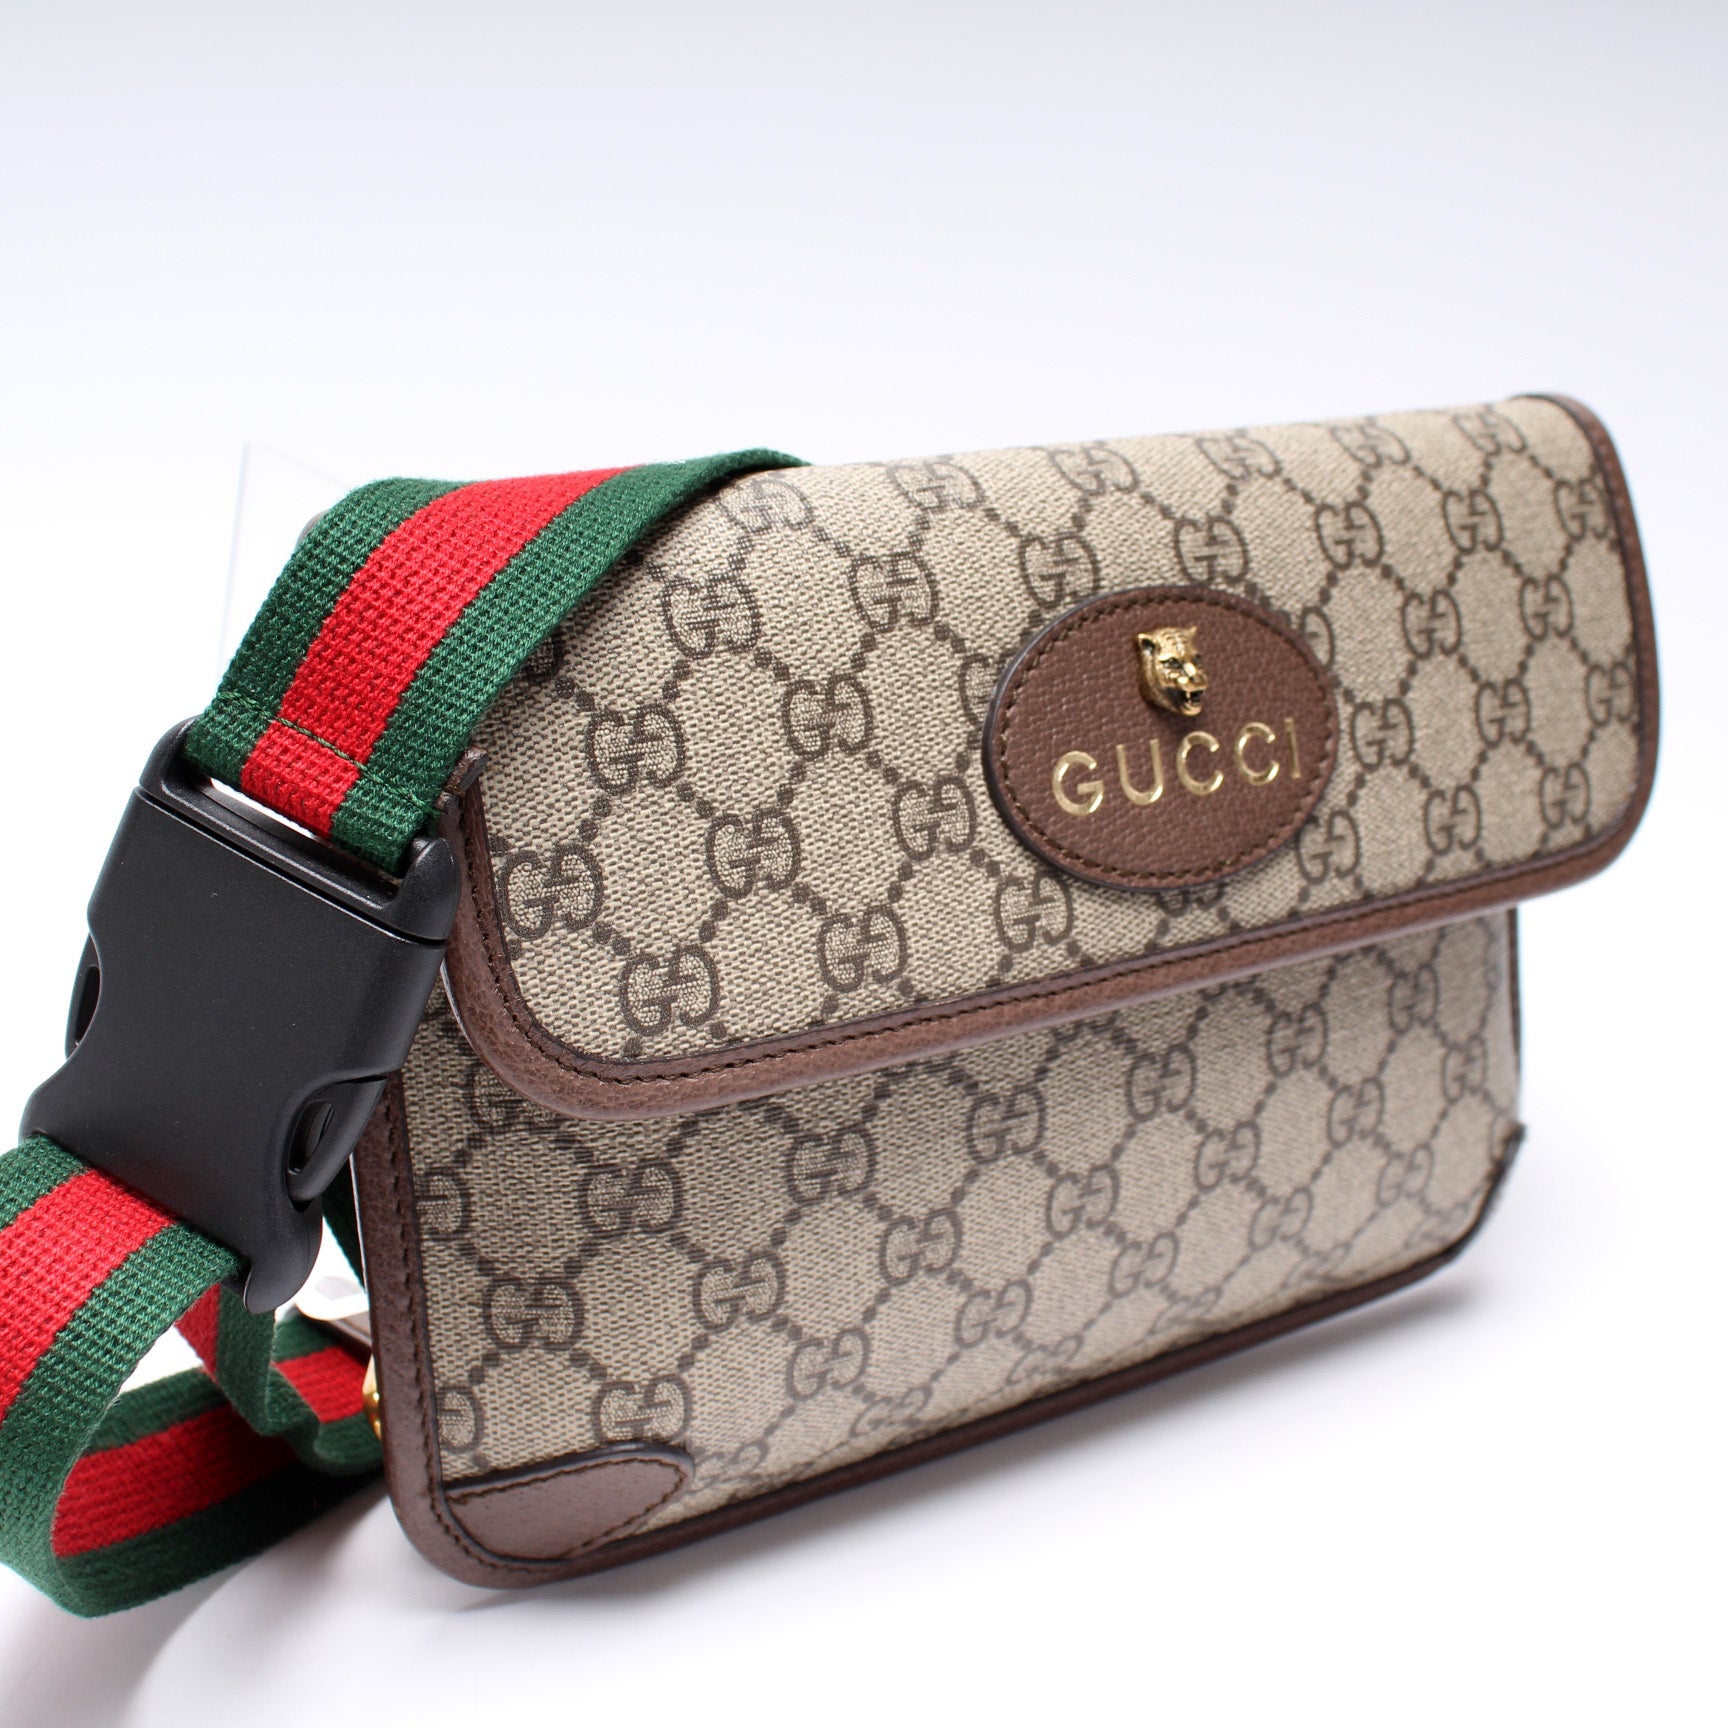 Gucci Brown GG Supreme Canvas and Leather Neo Vintage Web Belt Bag